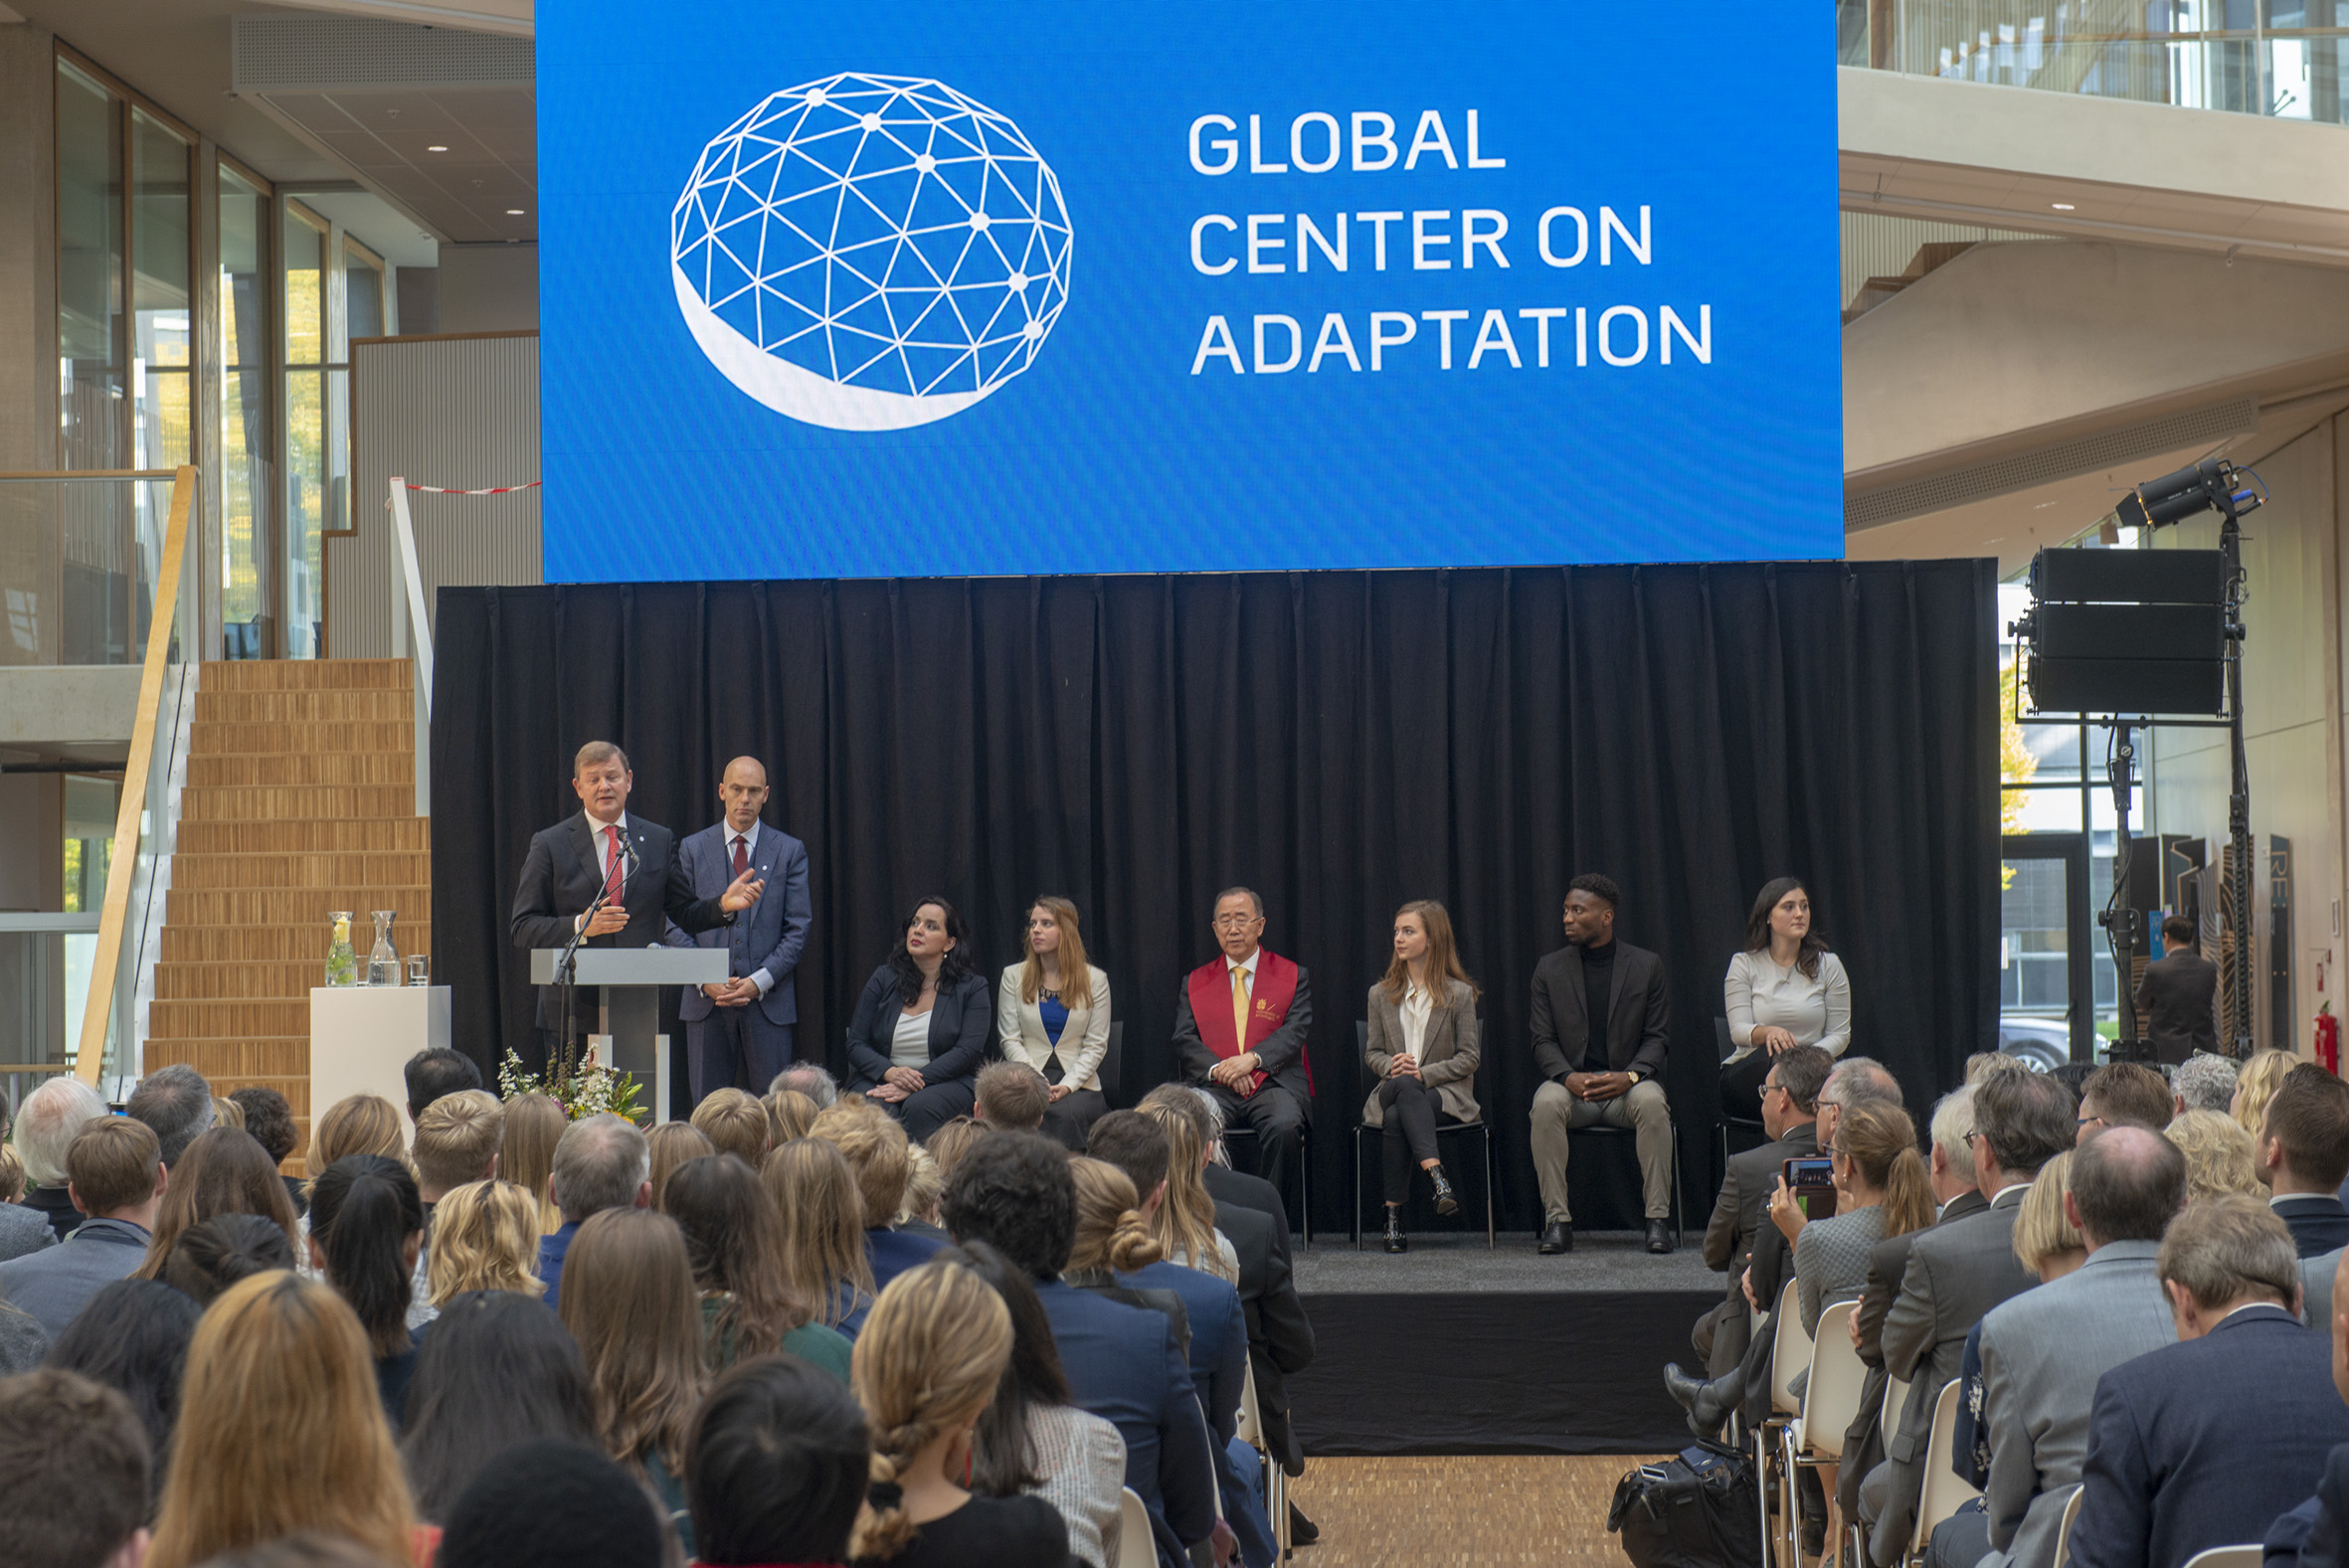 8th Secretary-General of the UN Ban Ki-moon opens Global Center on Adaptation Office in Groningen